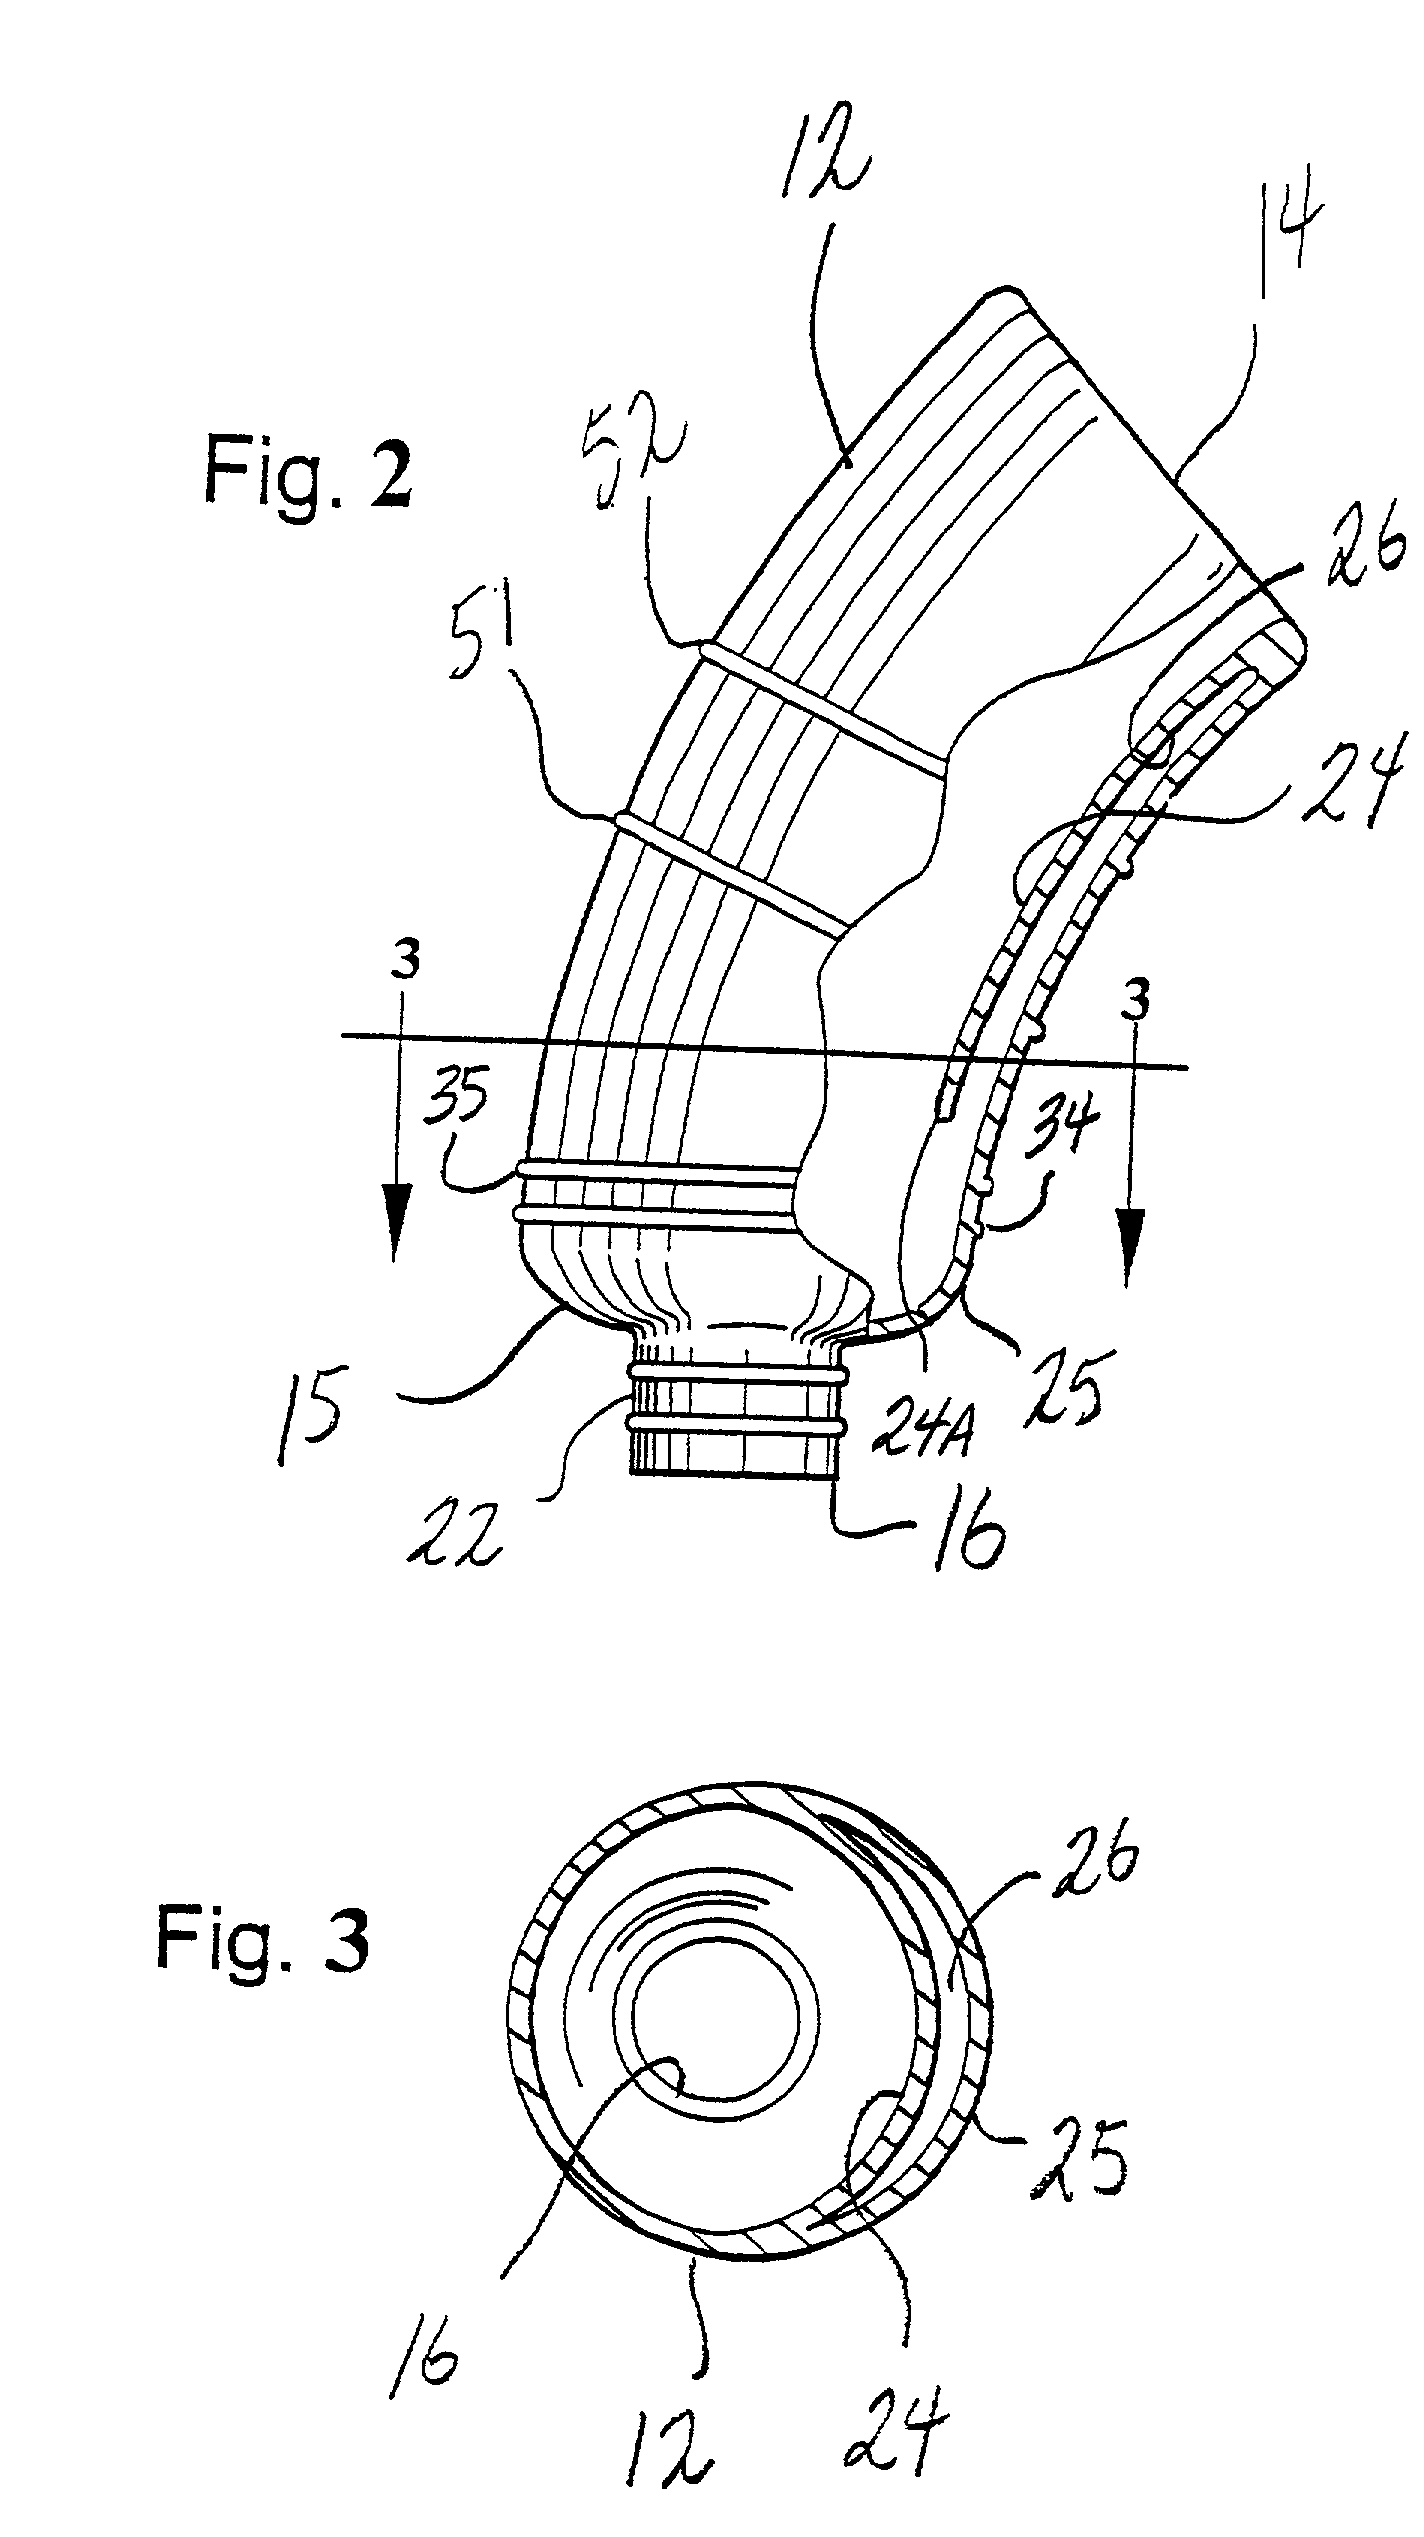 Male incontinence device